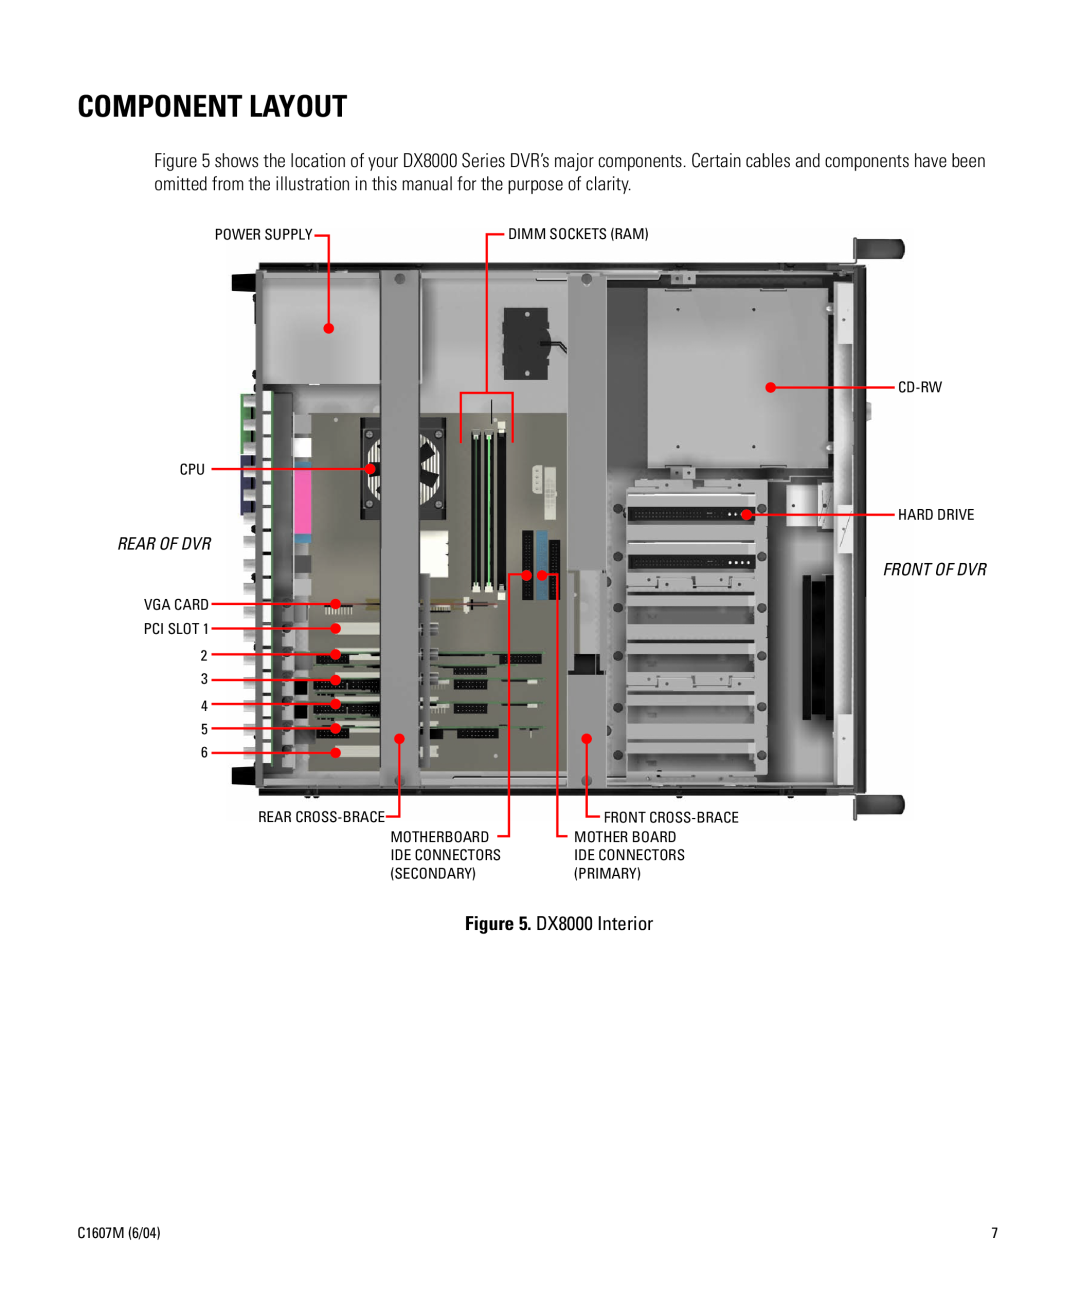 Pelco Dx8000 manual Component Layout 